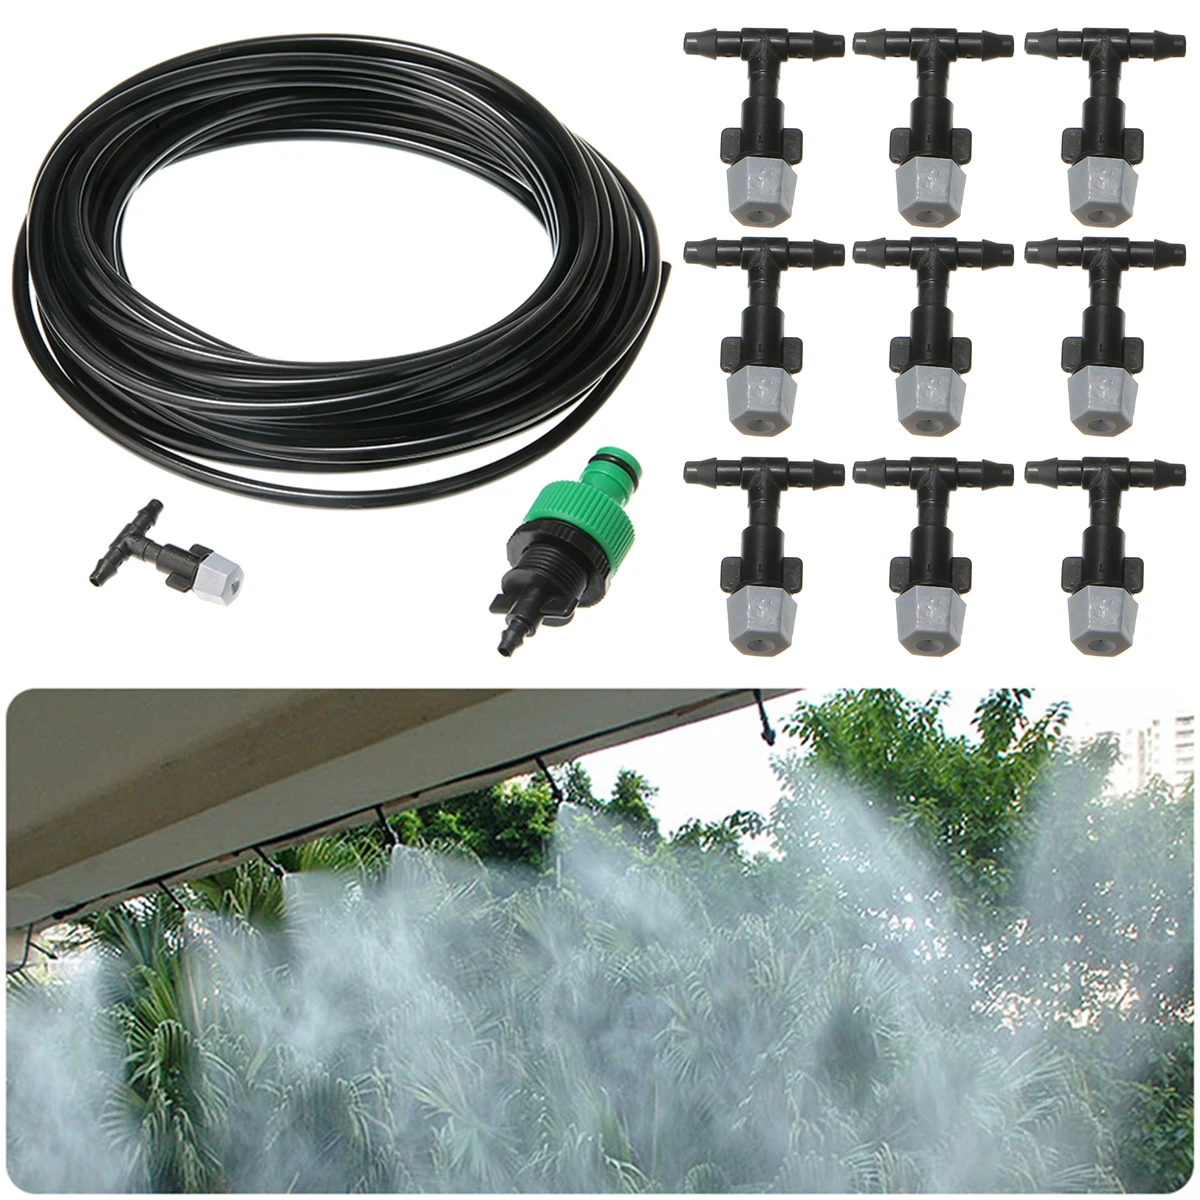 Garden Water Misting Cooling System Sprinkler Nozzle Micro Irrigation Kits Set 